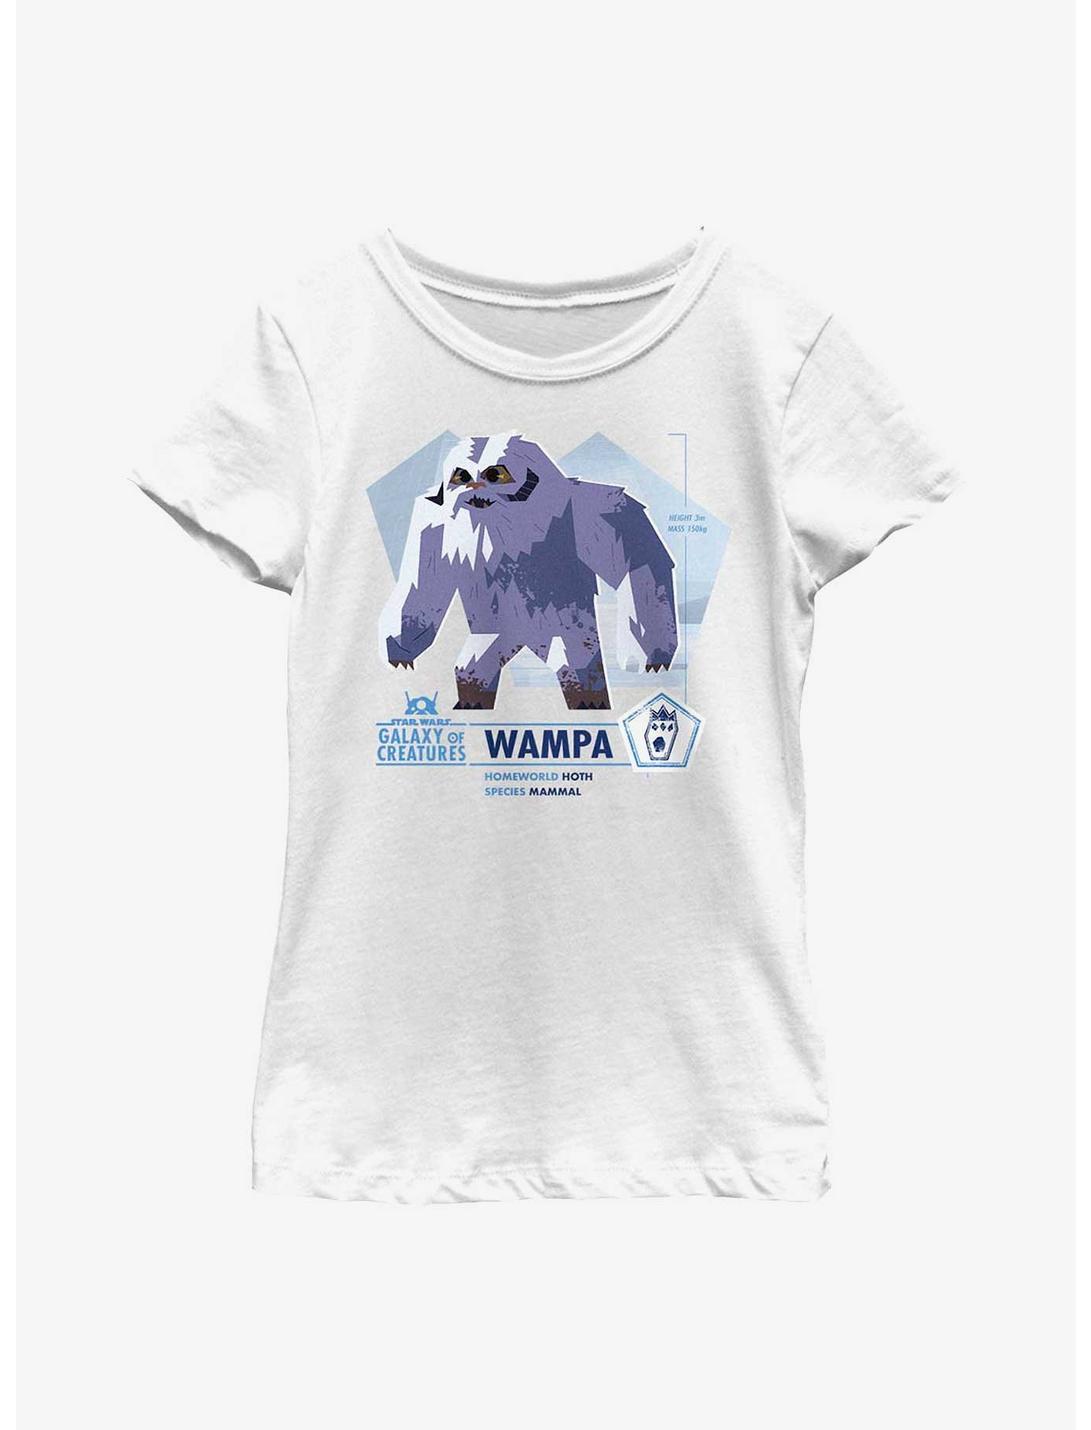 Star Wars Galaxy Of Creatures Wampa Species Youth Girls T-Shirt, WHITE, hi-res